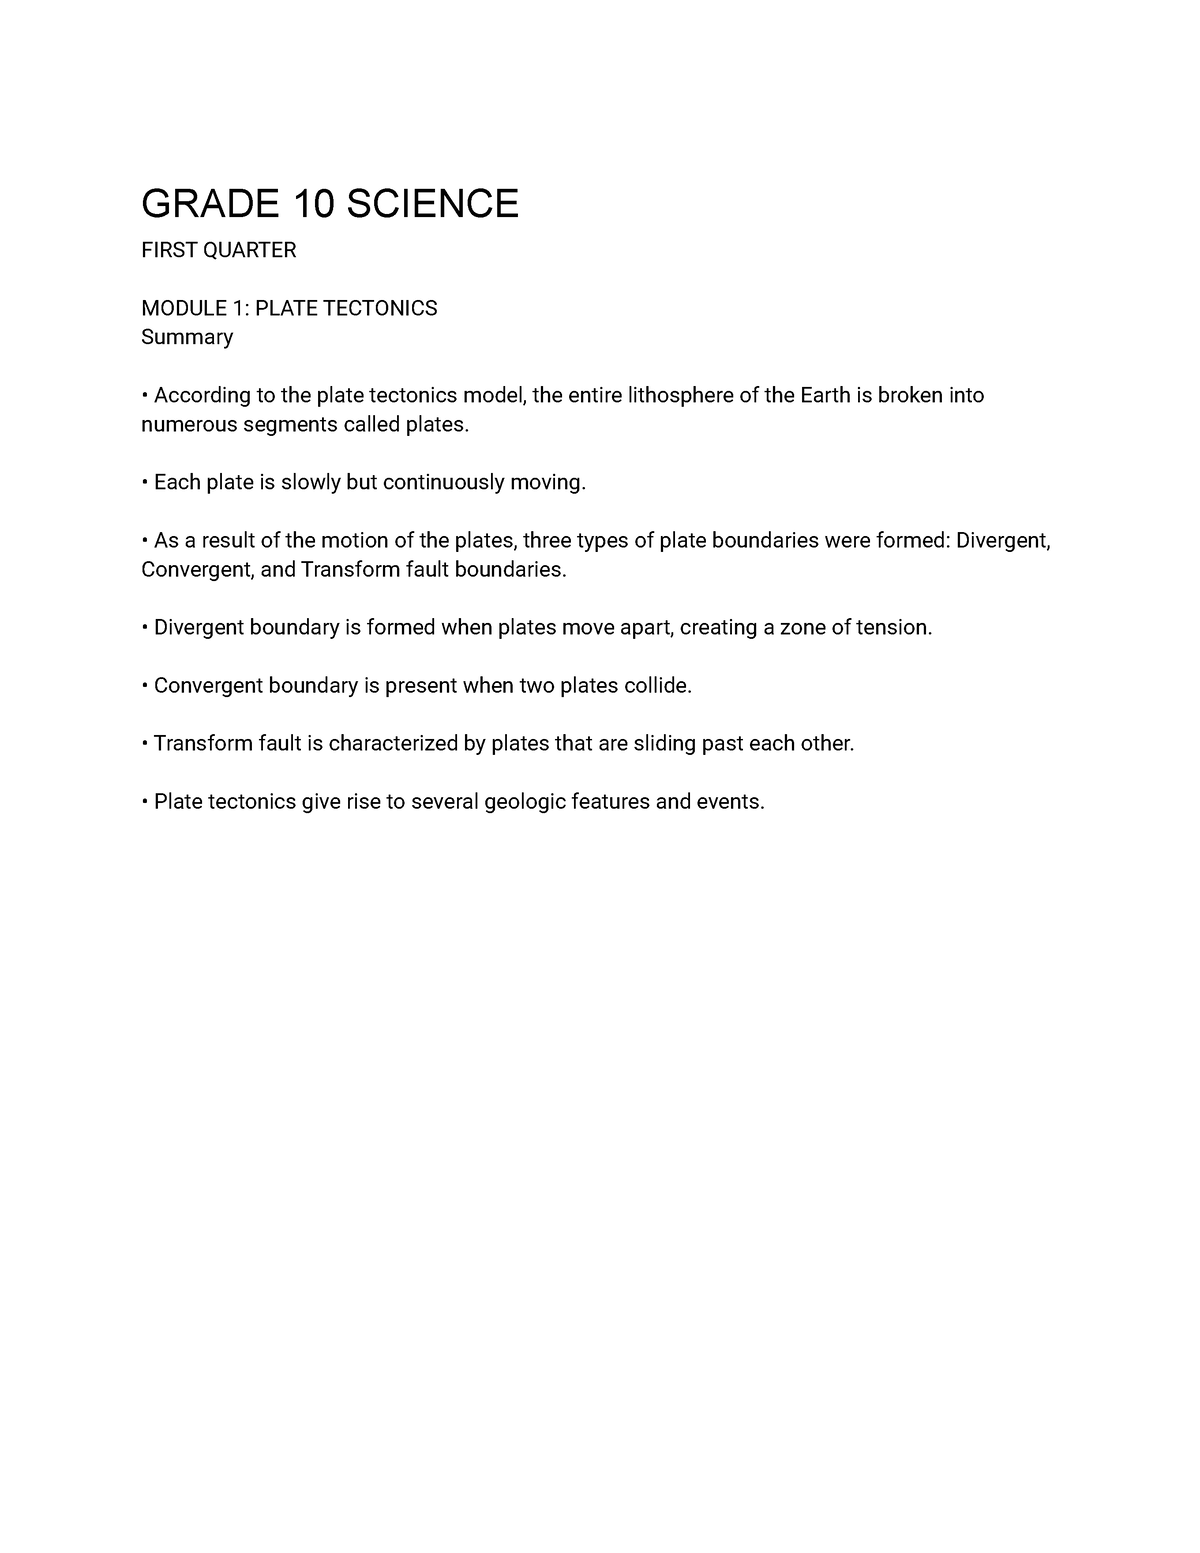 essay about science 10 first quarter